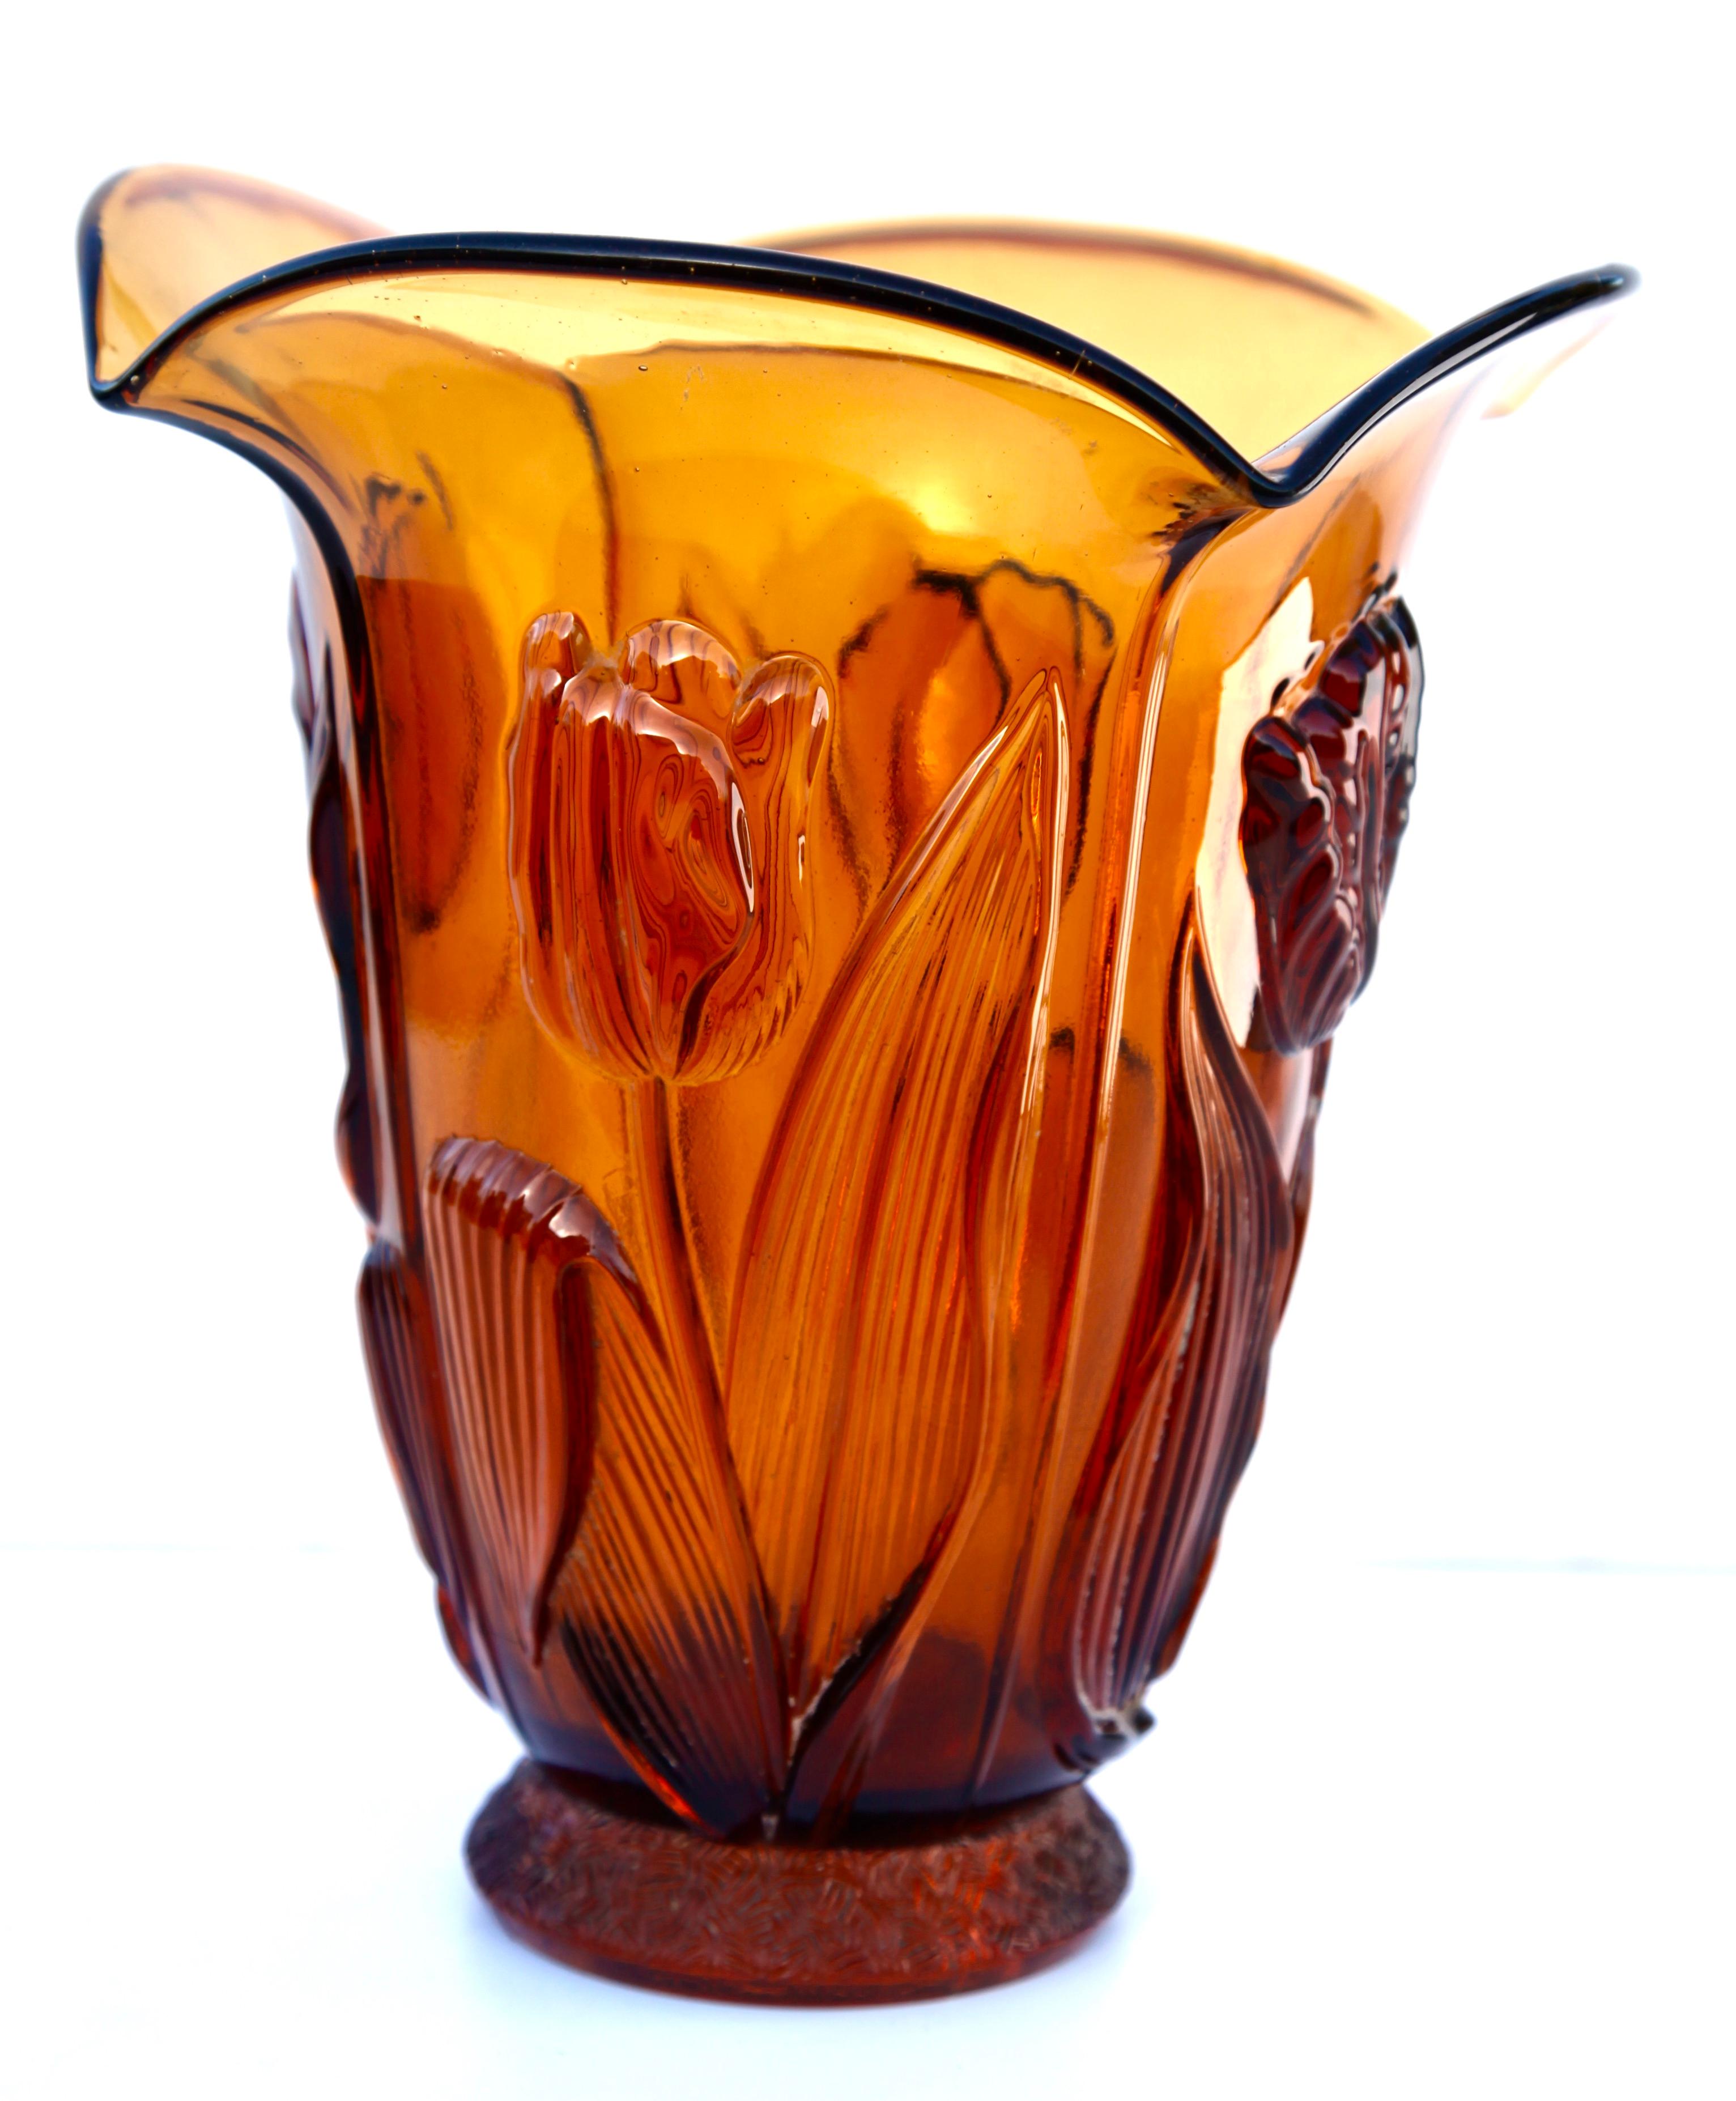 Beautiful Art Deco vase decorated with tulips, by the Scailmont Glassworks in Manage, Belgium.
Object of beautiful amber colour, in perfect condition, which bears the mark 